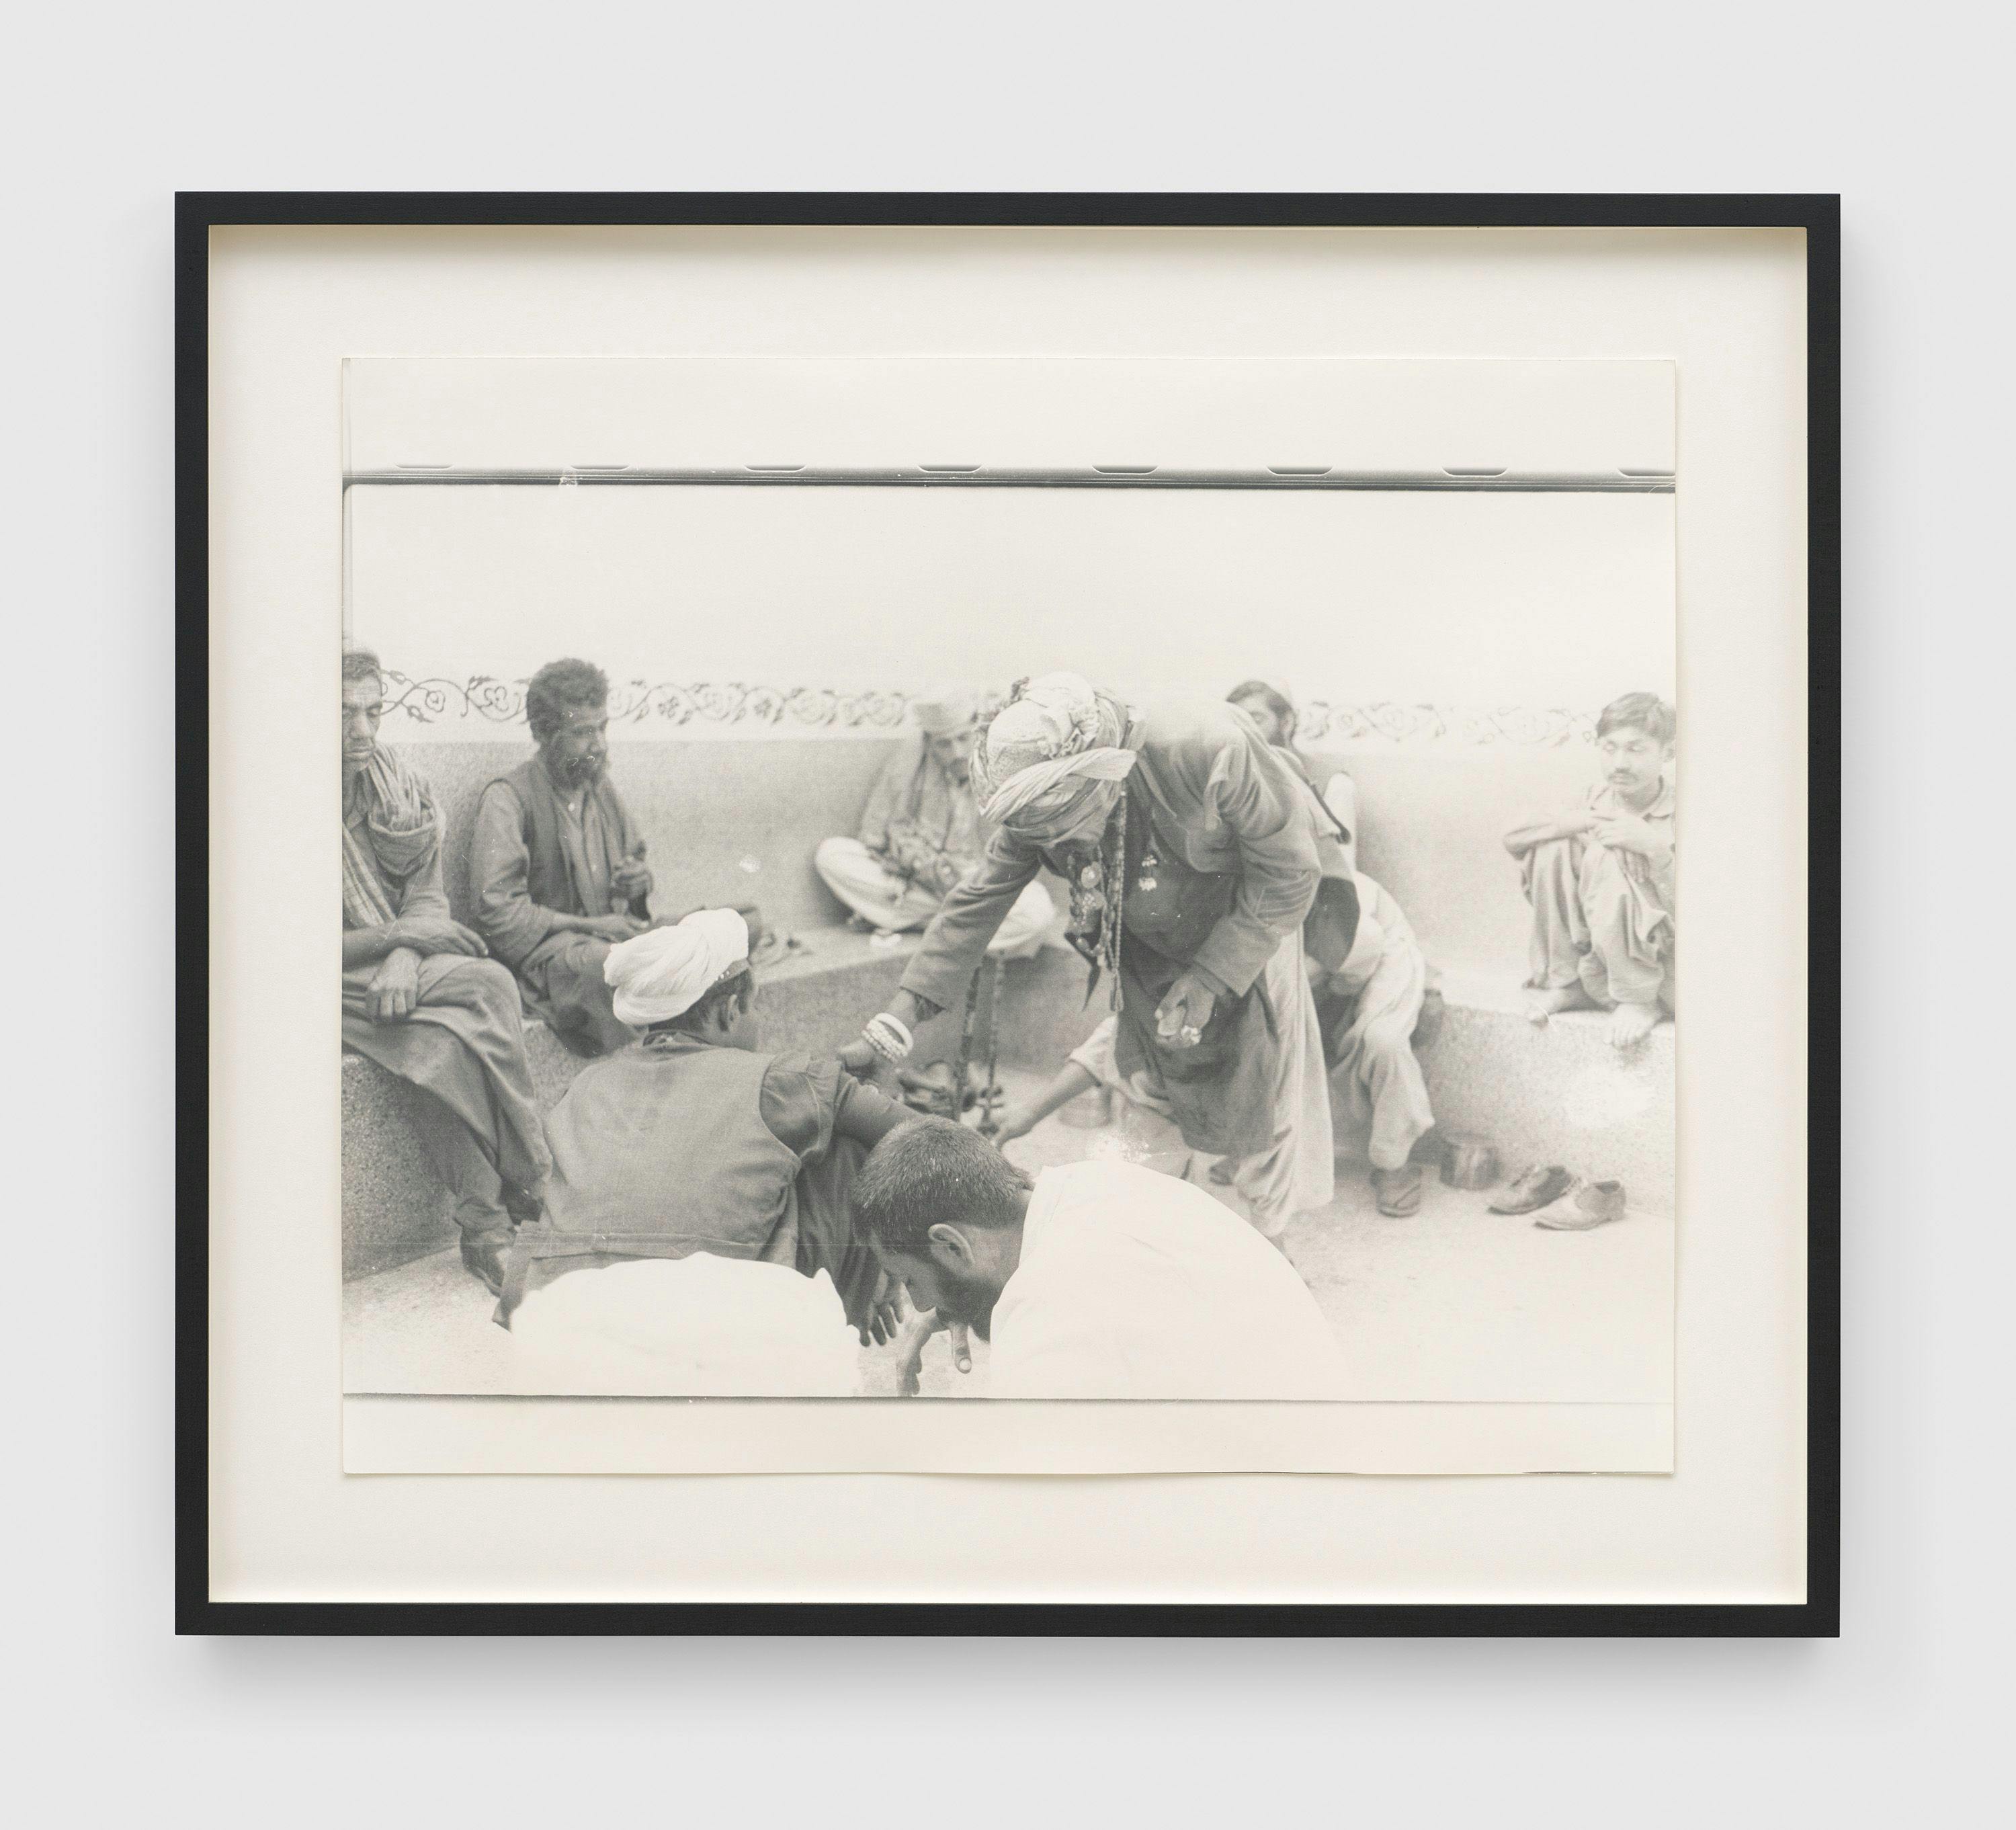 A part of an artwork installation by Sigmar Polke titled Quetta, dated 1974